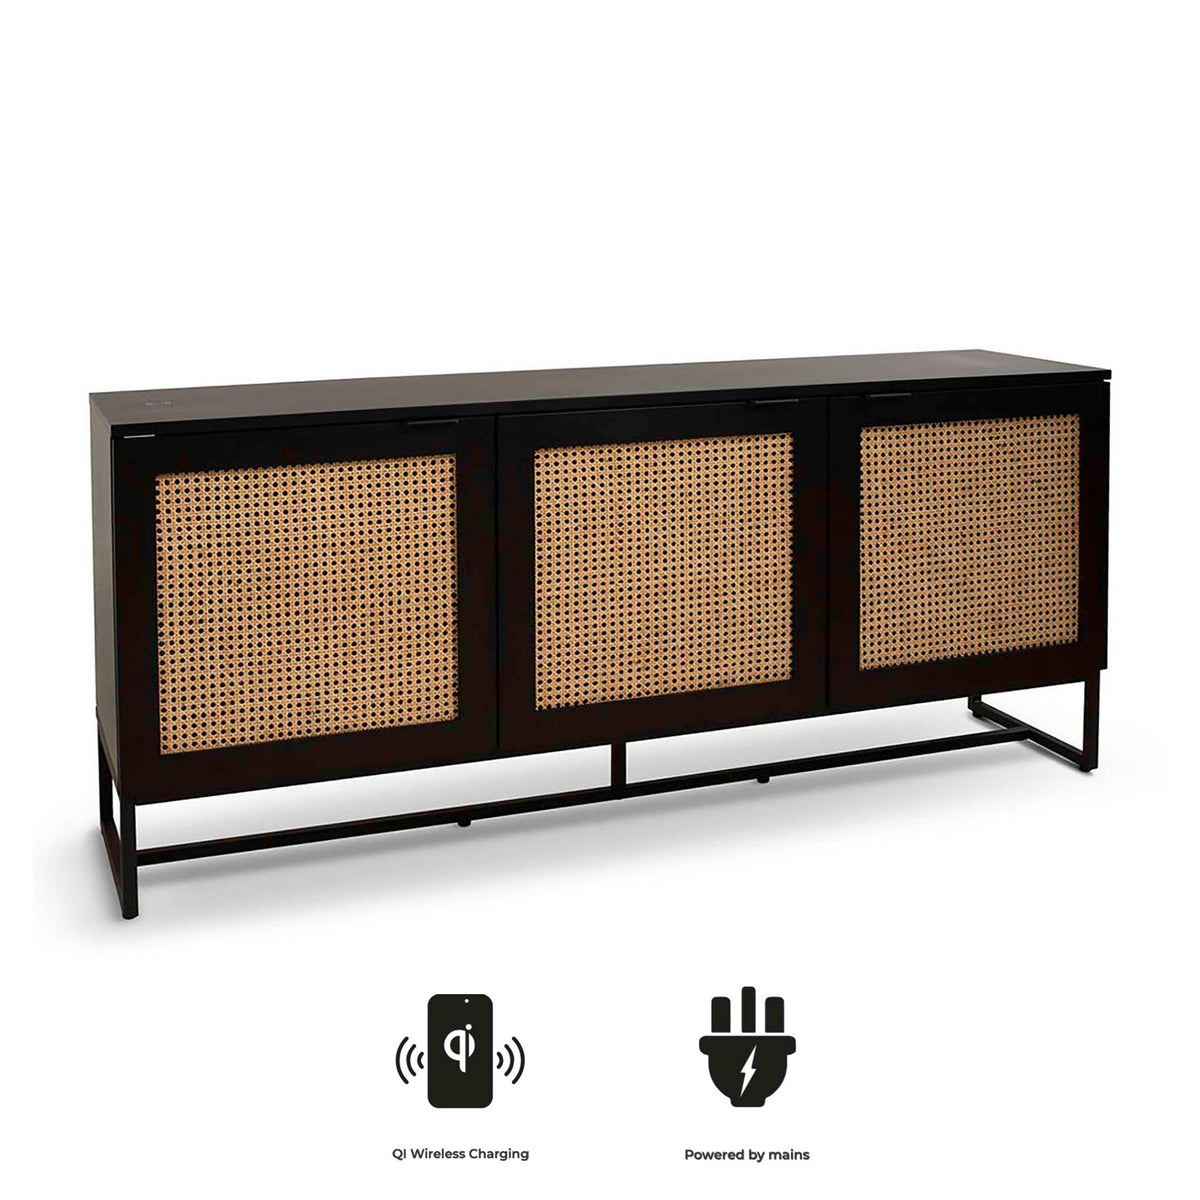 Mia Black Smart Sideboard Cabinet from Roseland Furniture